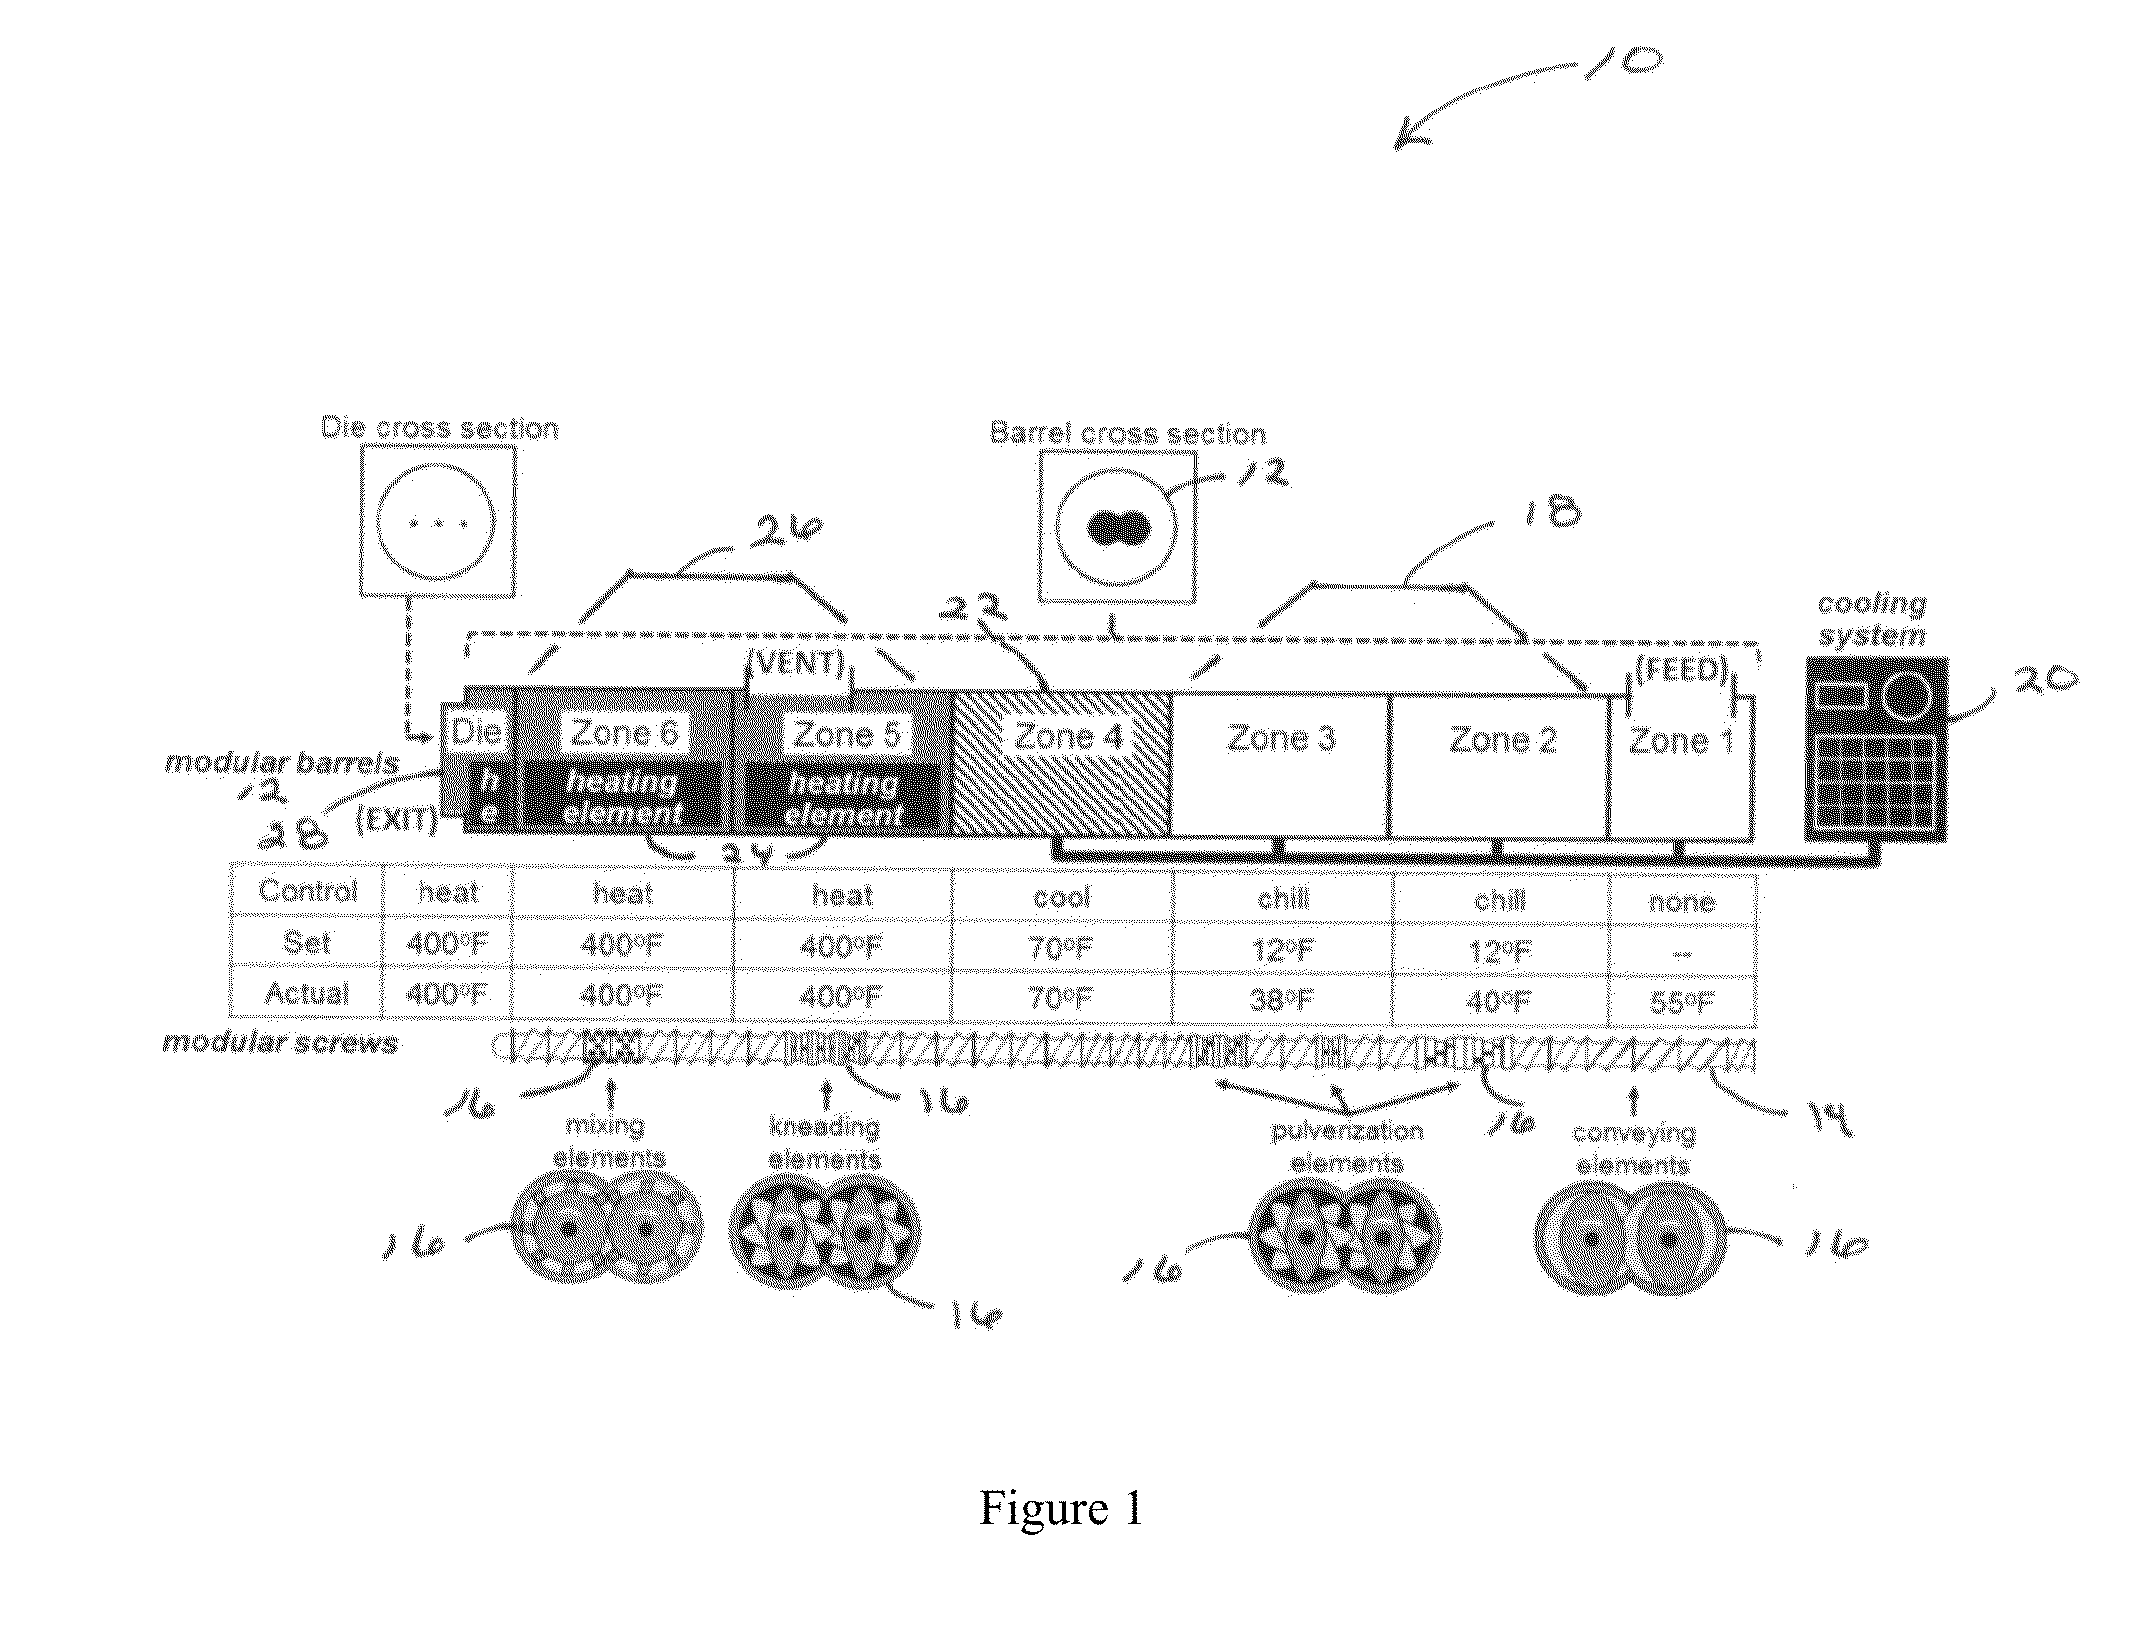 Process for Producing Exfoliated and/or Dispersed Polymer Composites and/or Nanocomposites via Solid-State/Melt Extrusion (SSME)